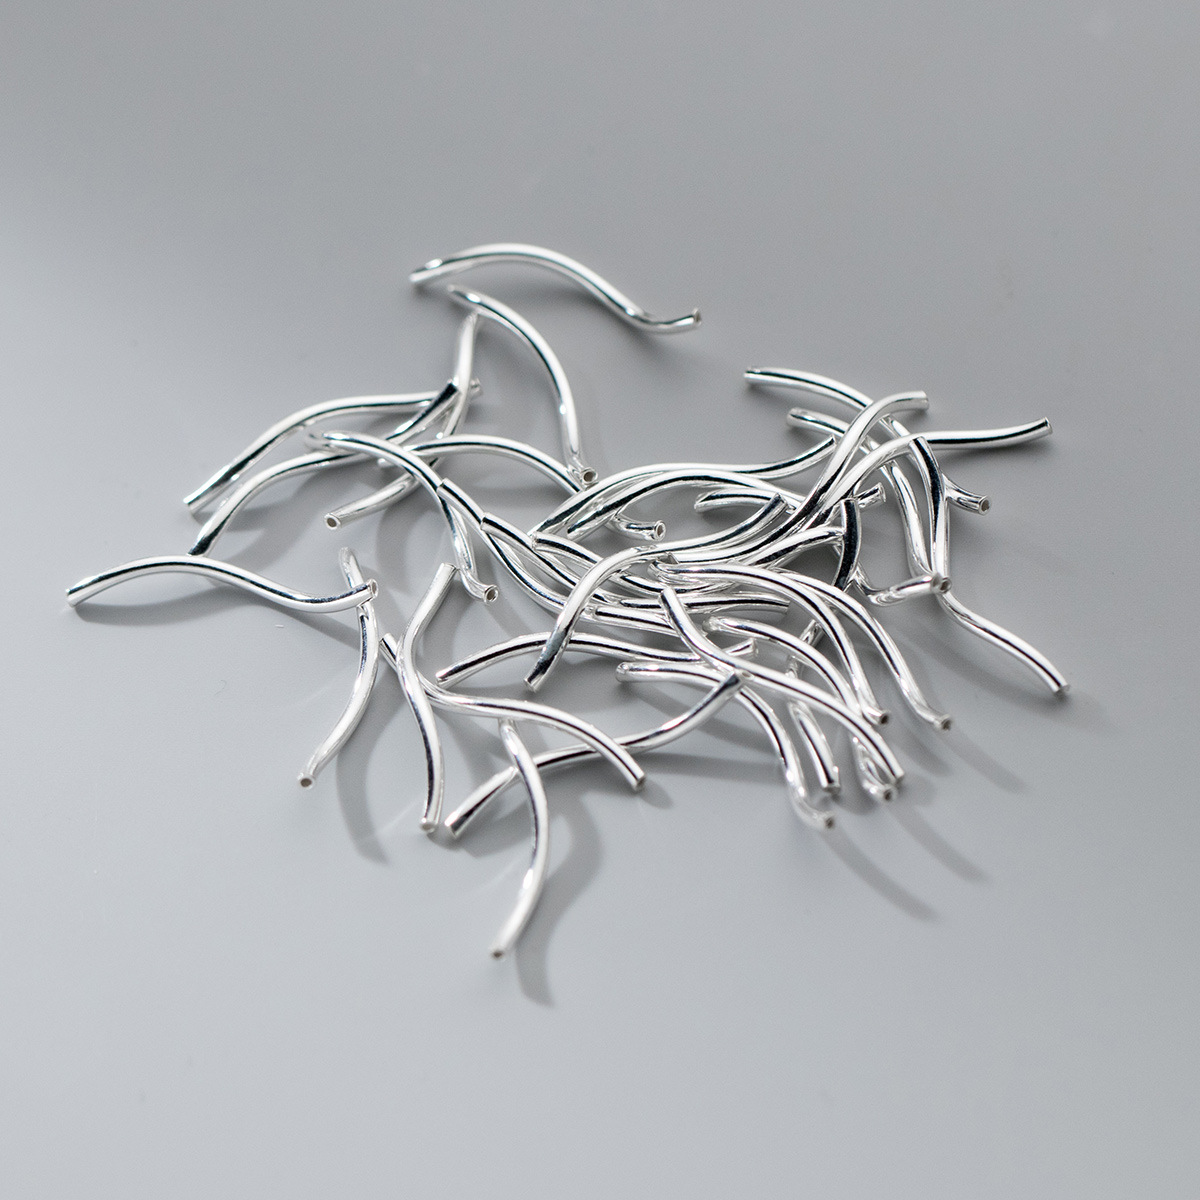 Electroplated silver